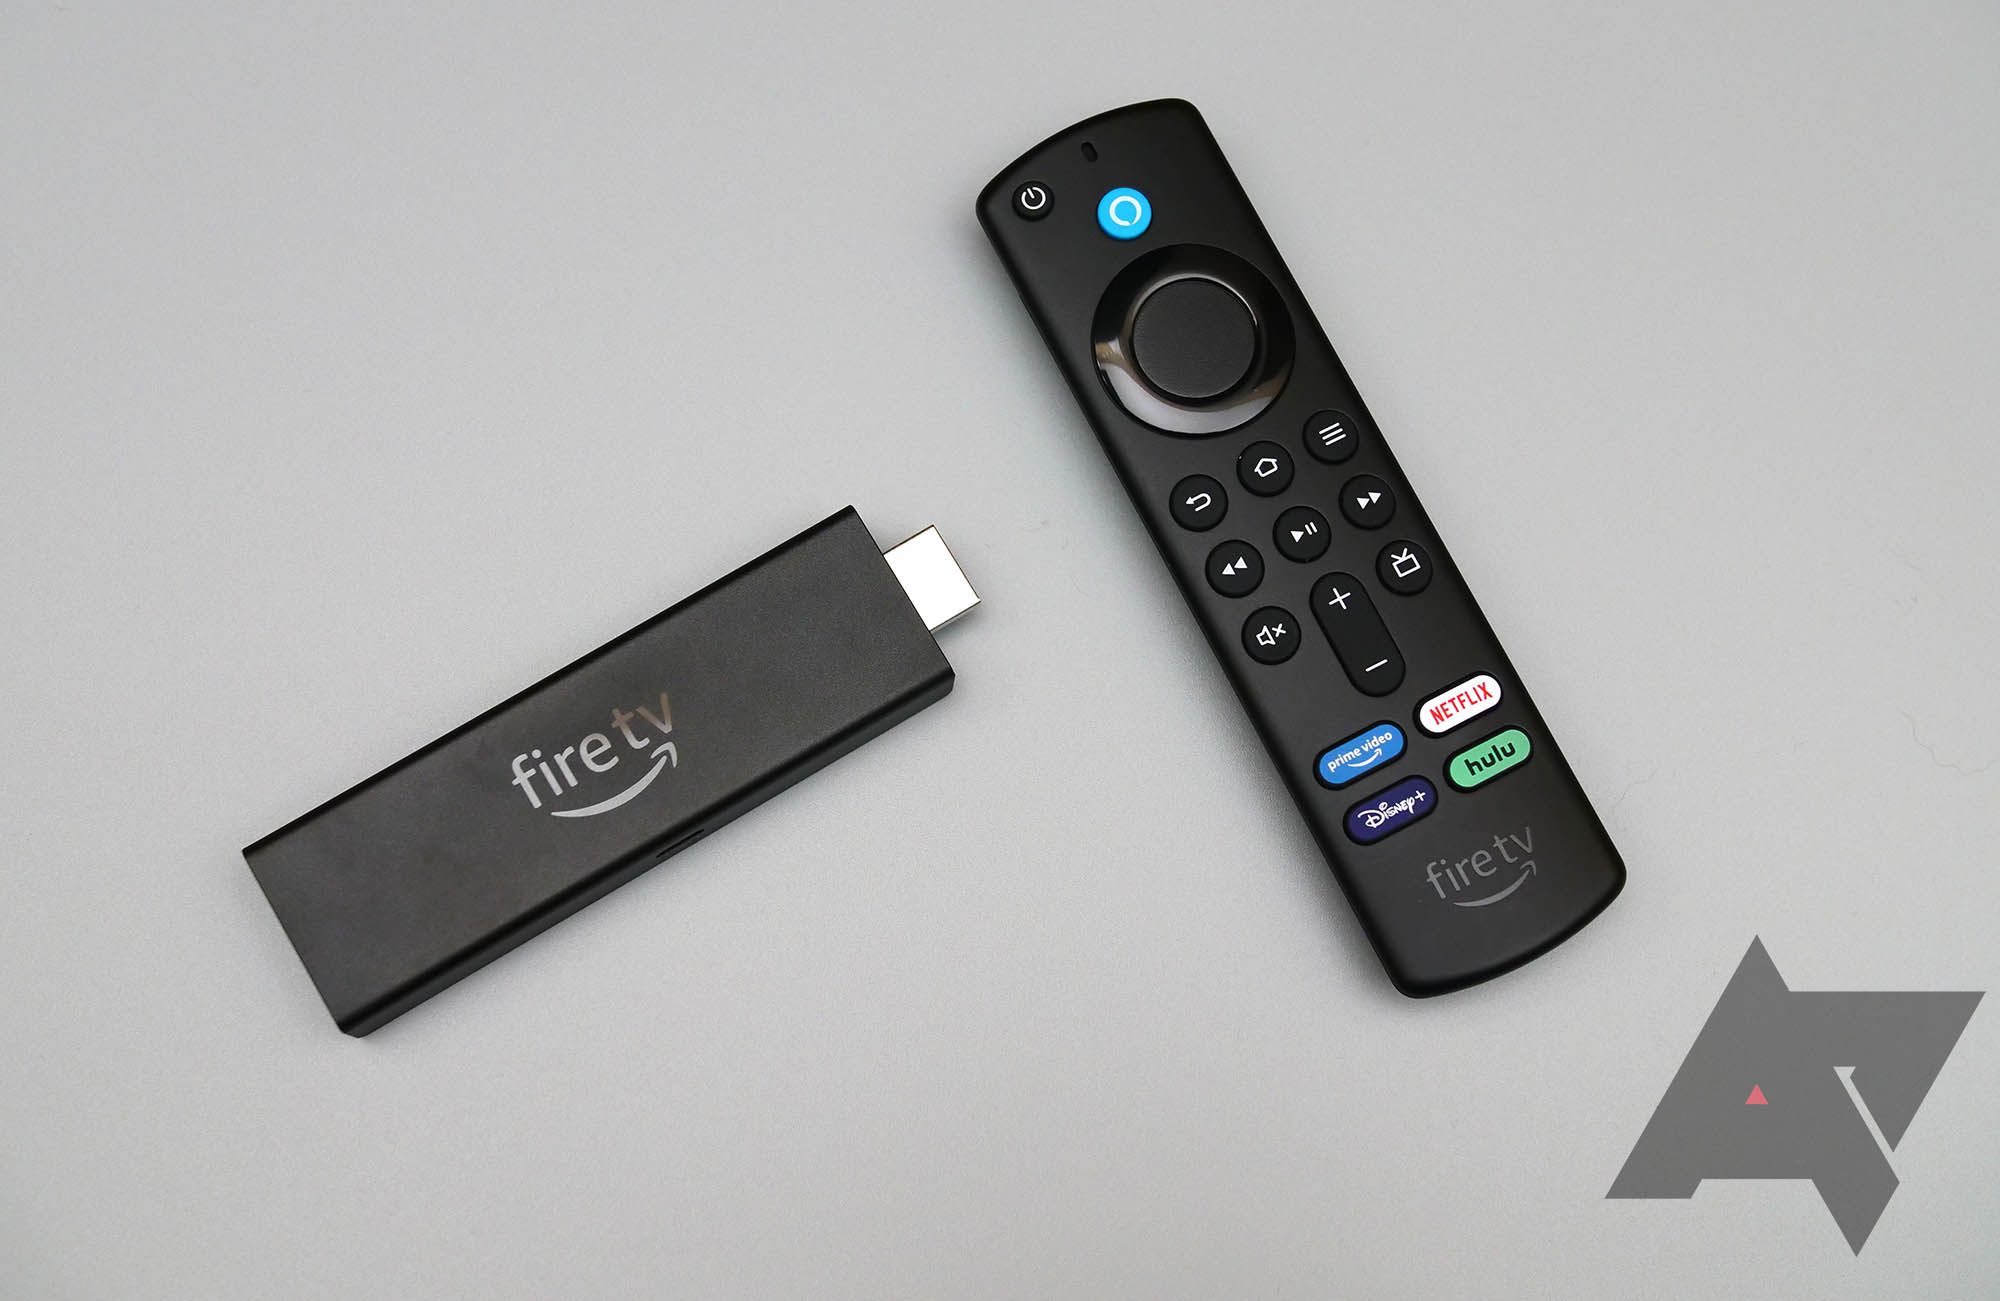 s Fire TV Stick 4K Max returns to record low of $35